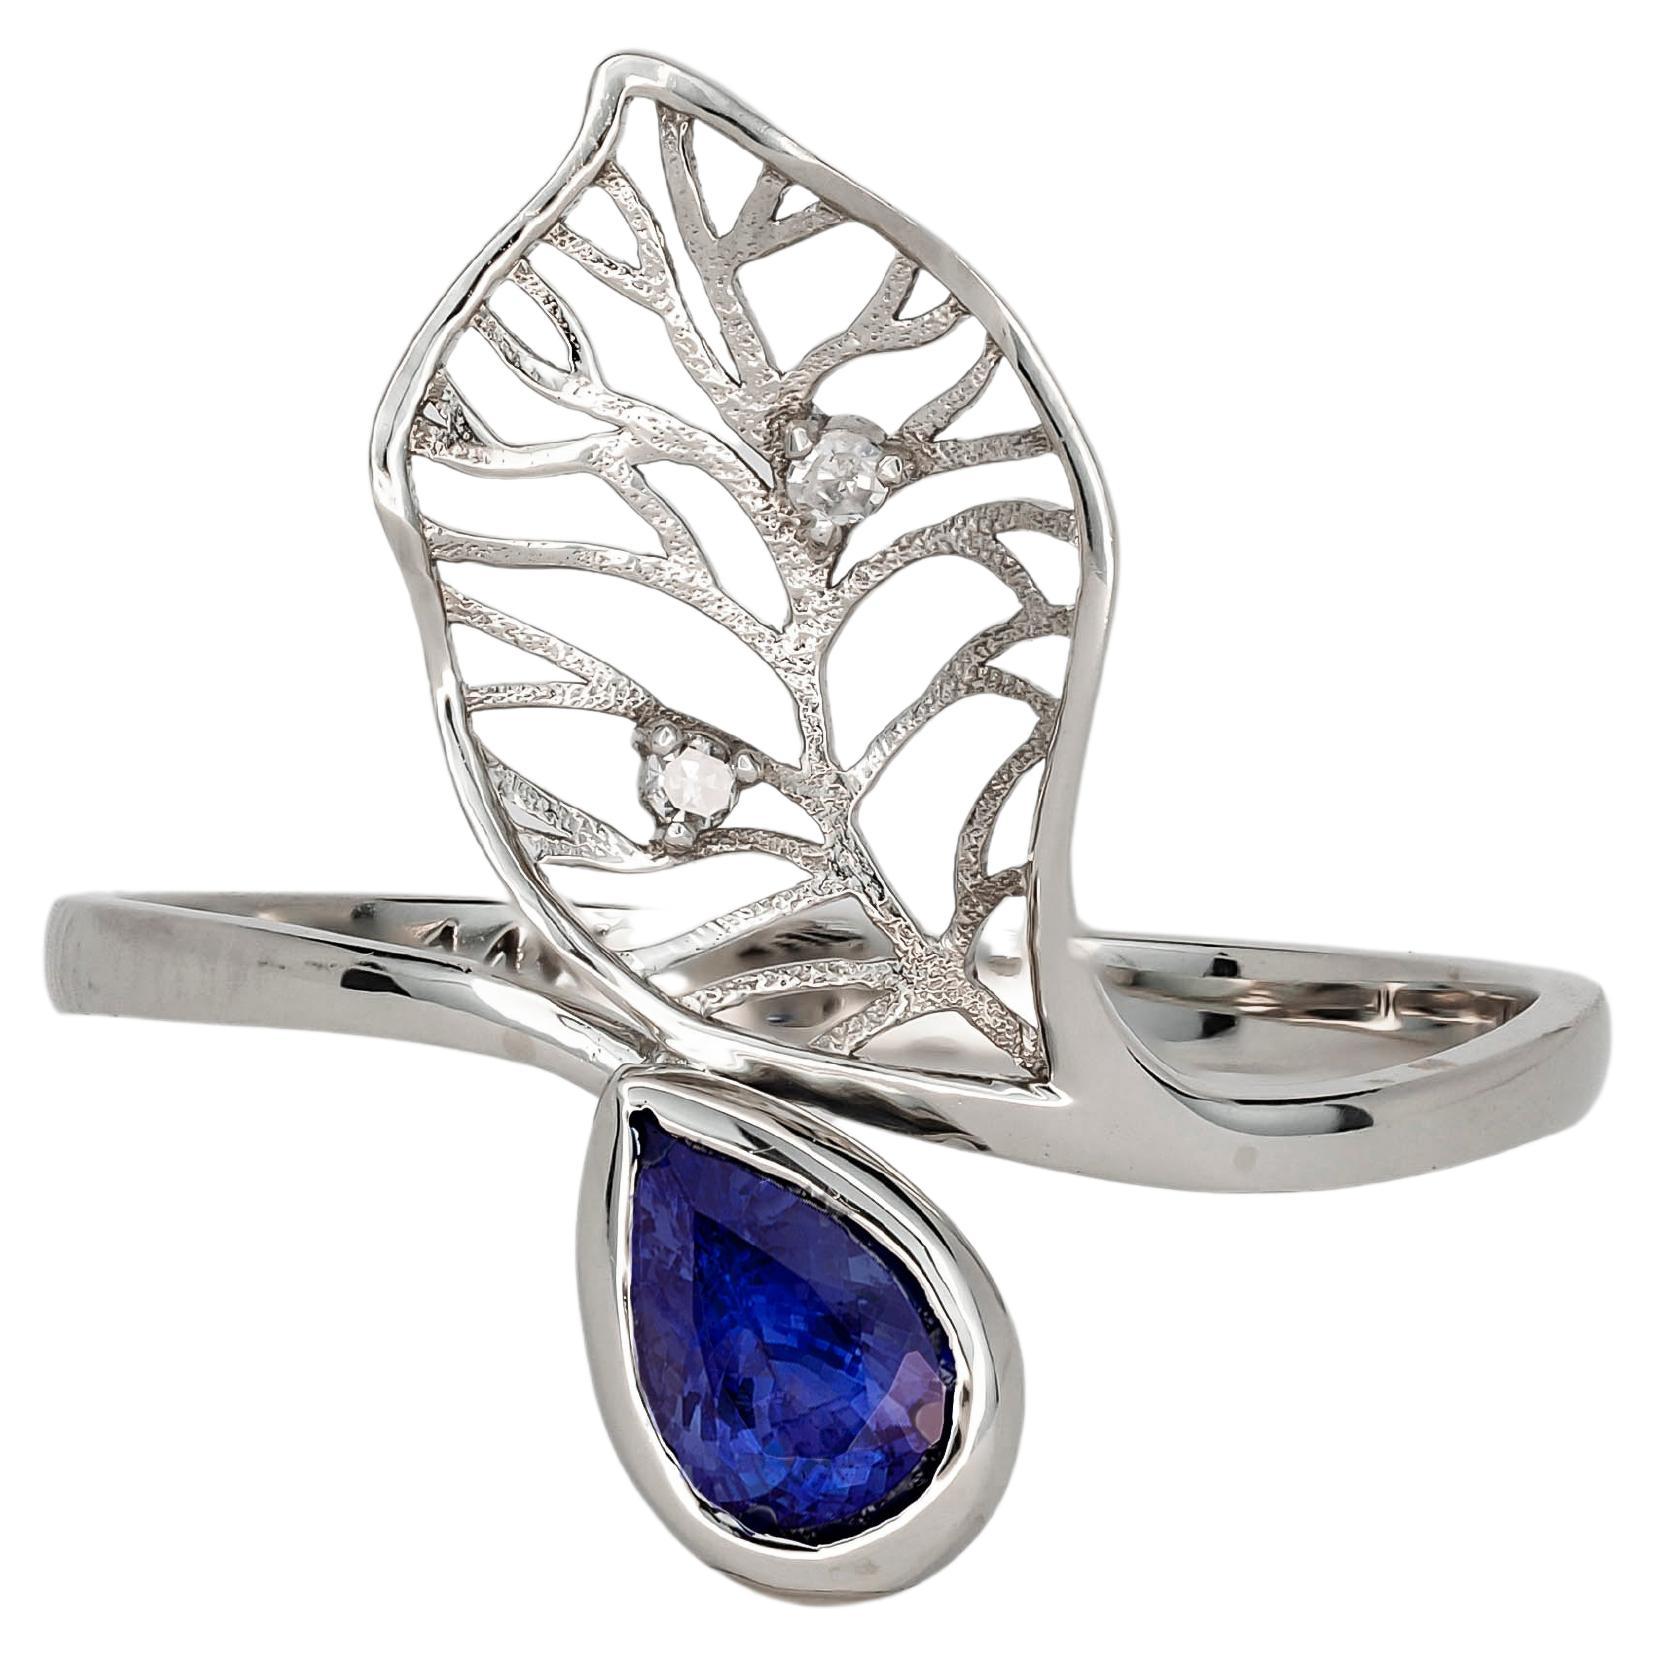 For Sale:  14k Gold Floral Design Ring with Sapphire and Diamonds, Leaf Ring